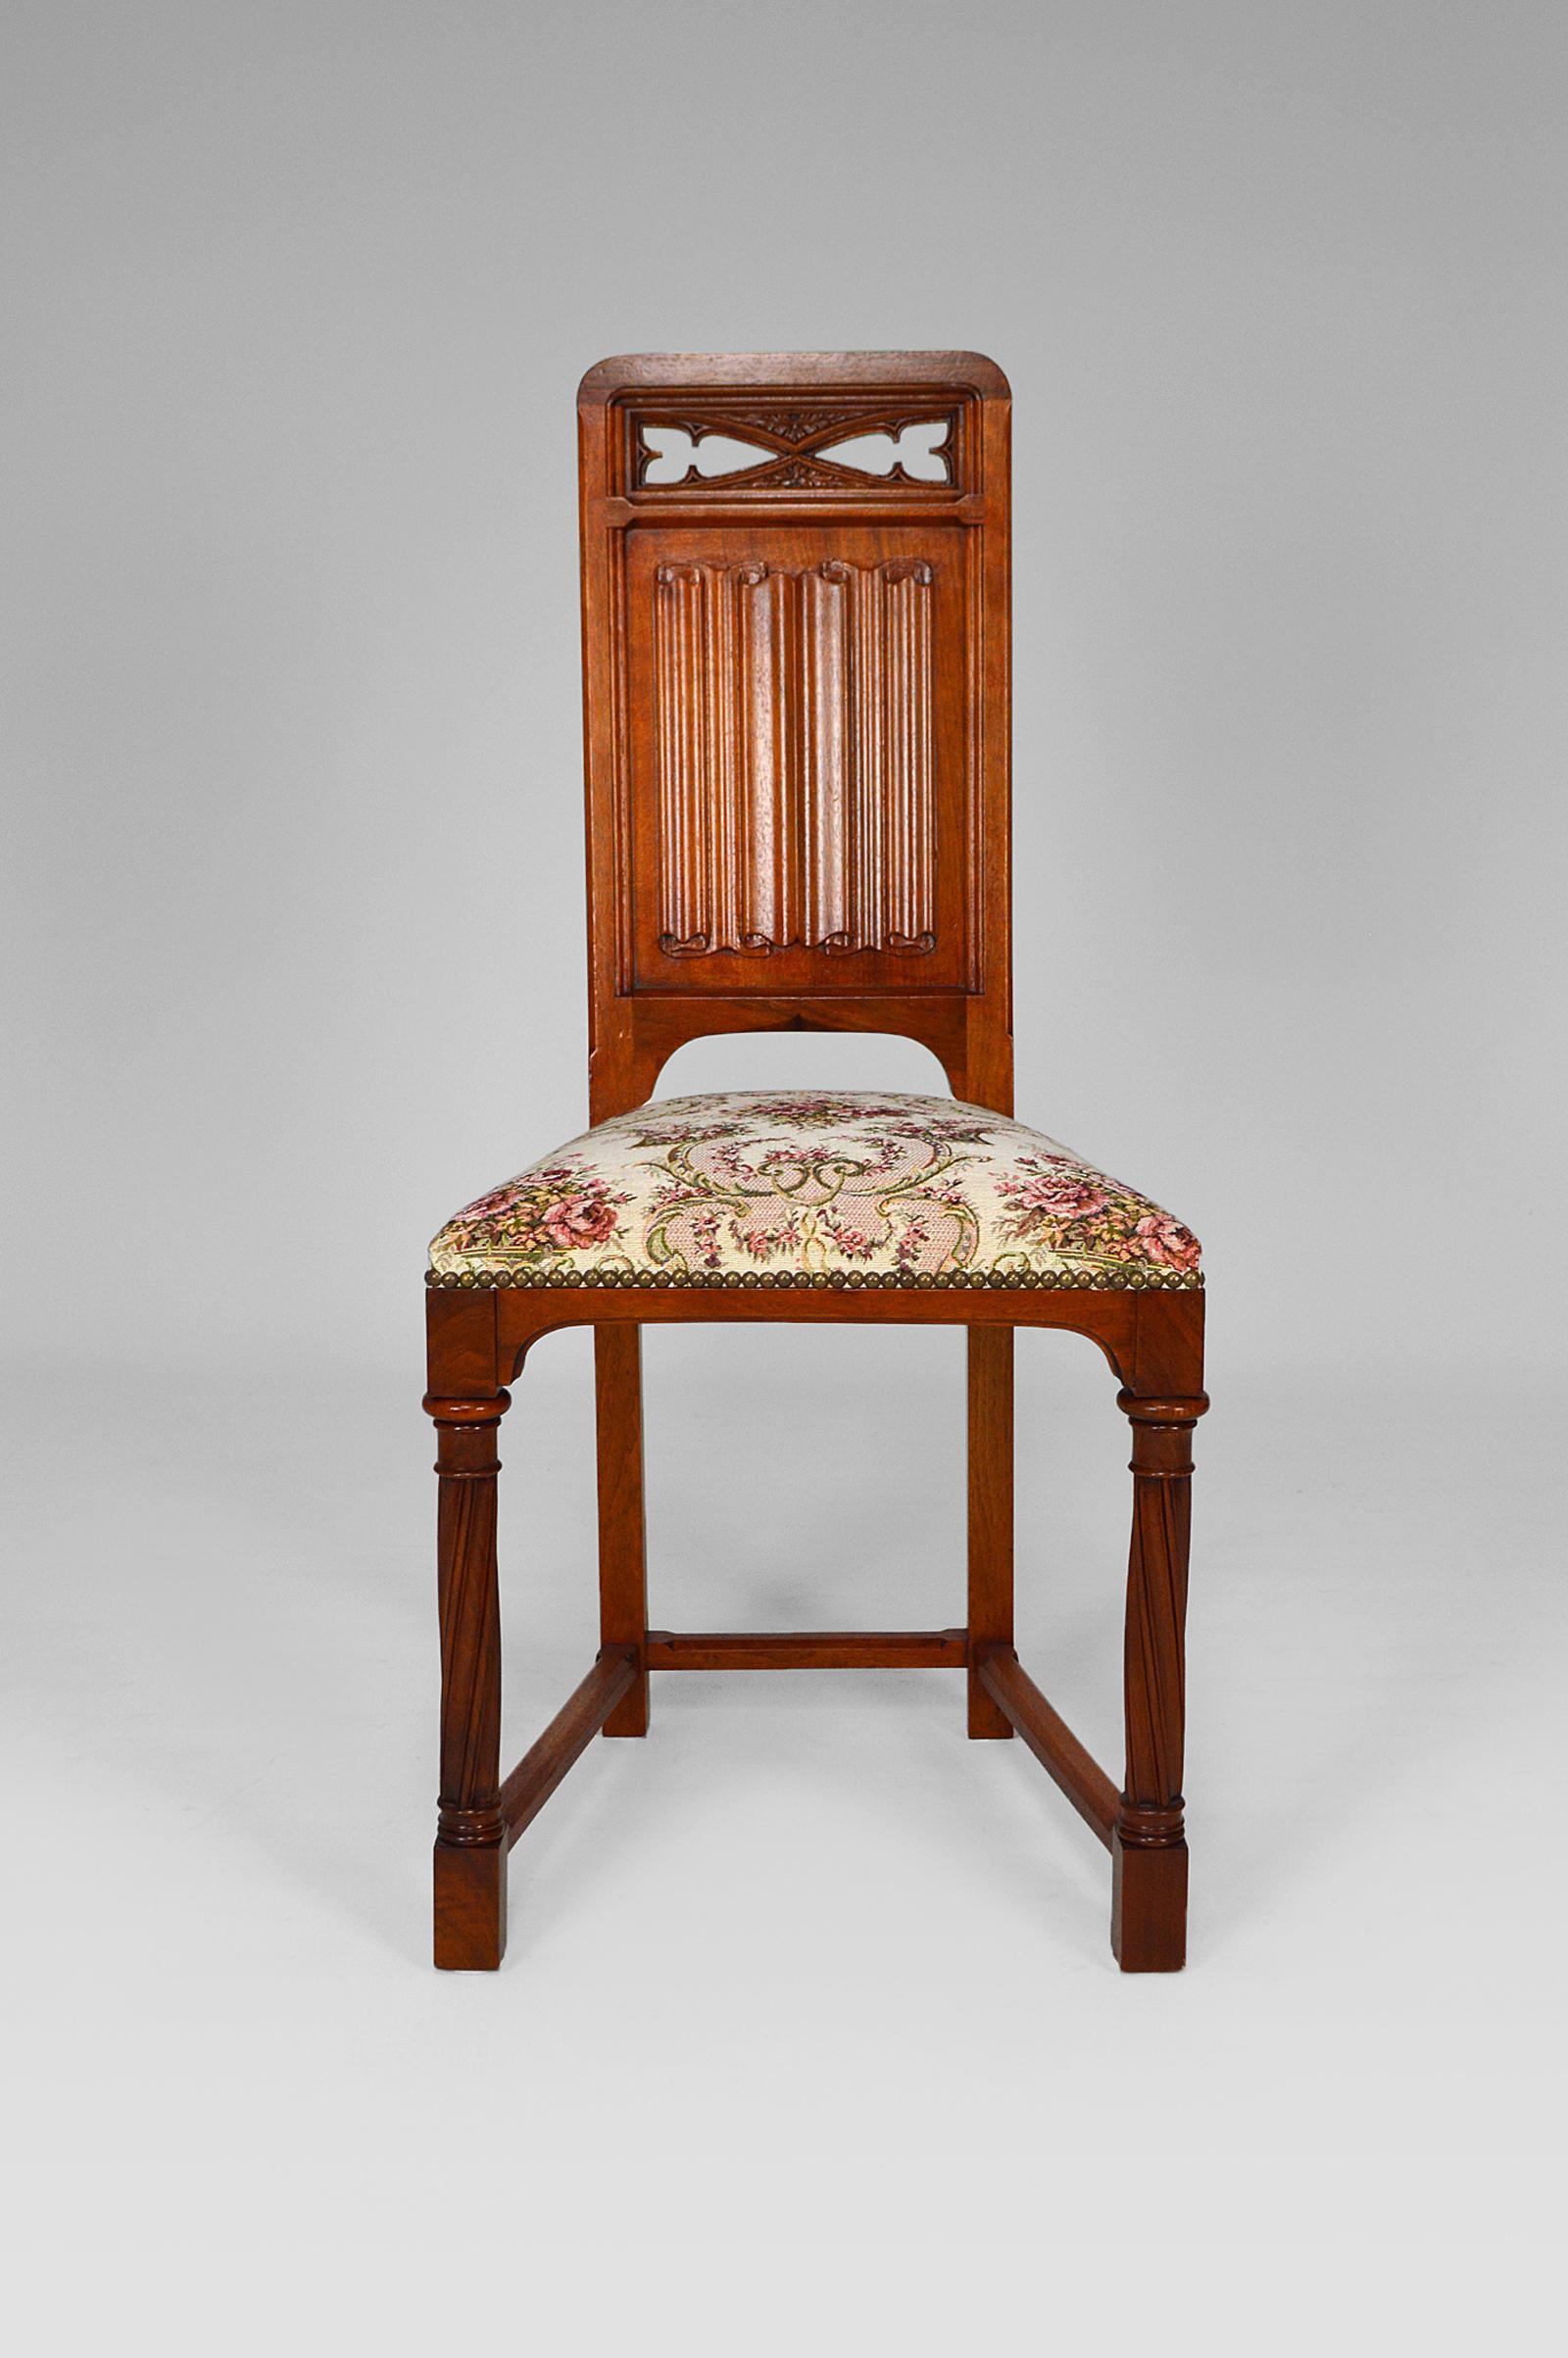 Fabric Pair of Antique Victorian Gothic Revival Chairs in Carved Walnut, 19th Century For Sale